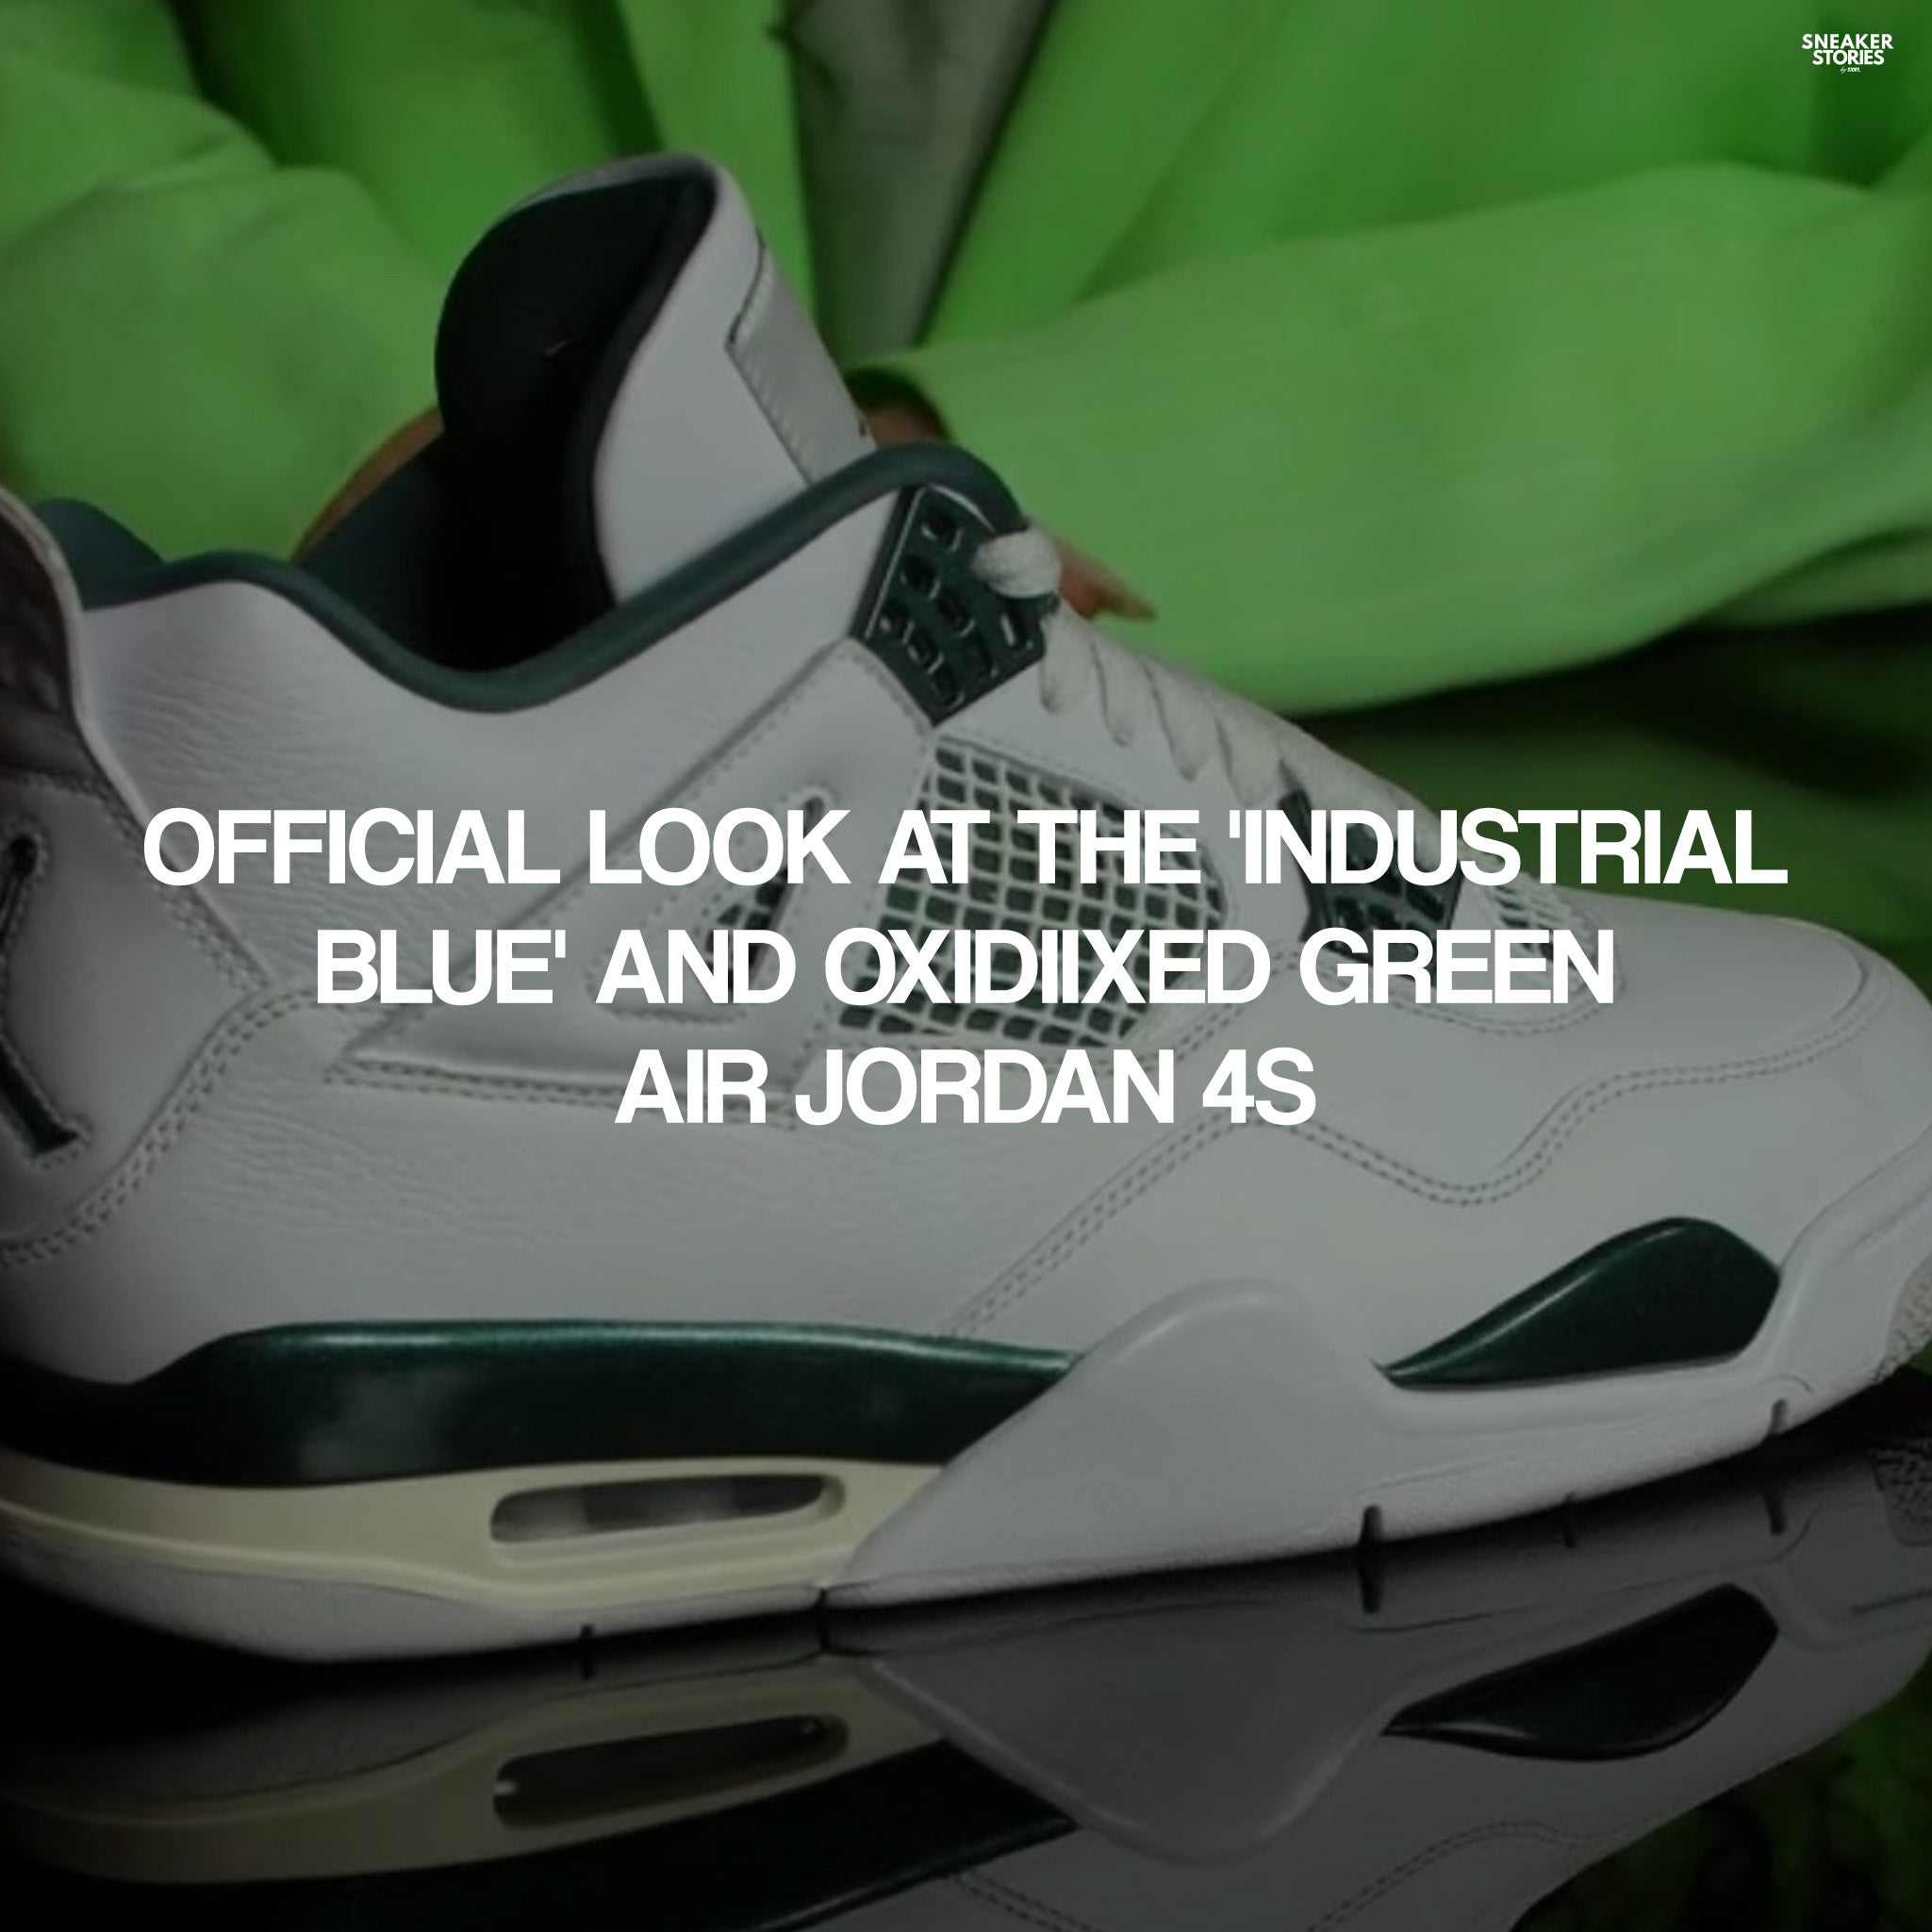 Official Look at the 'Industrial Blue' and Oxidiixed Green Air Jordan 4s